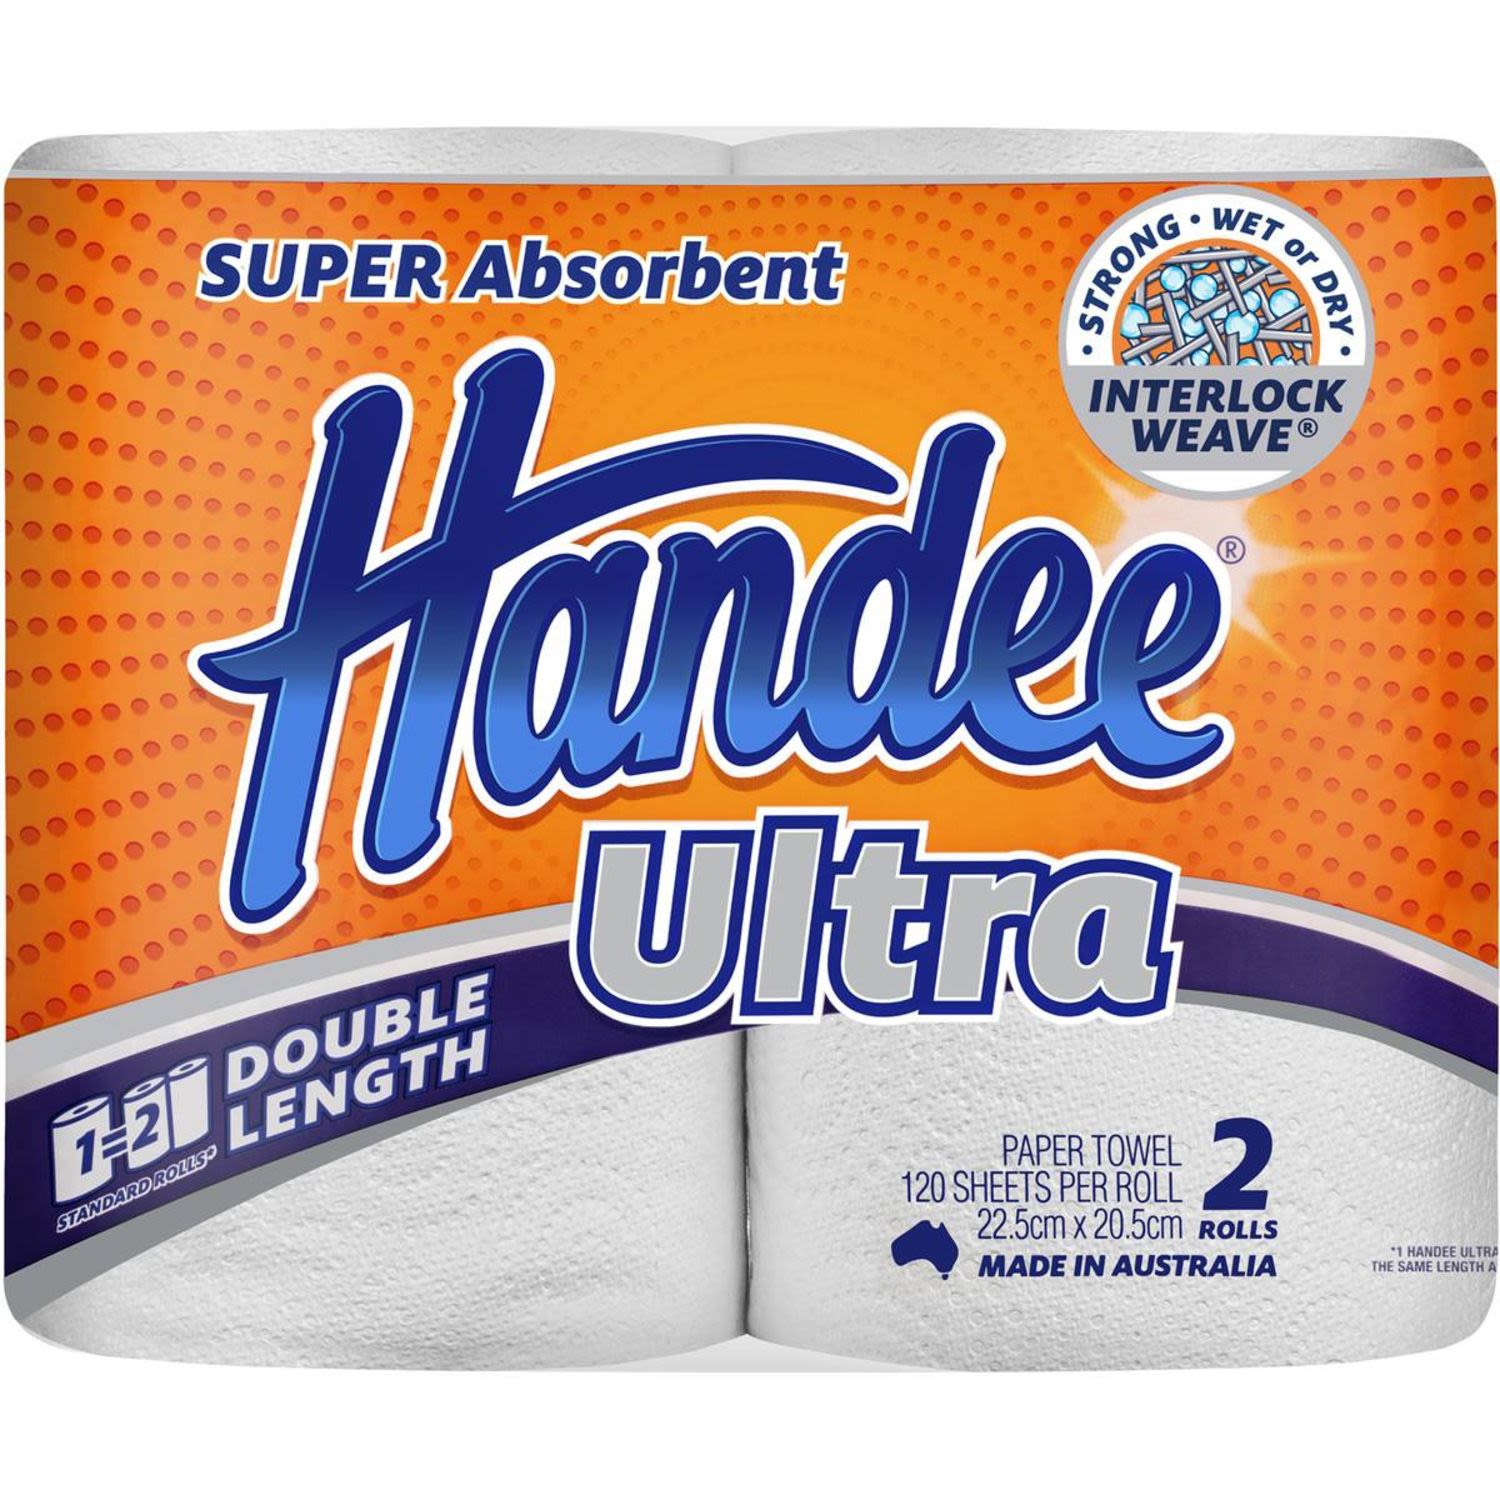 Handee Ultra Paper Towel Double Length White, 2 Each